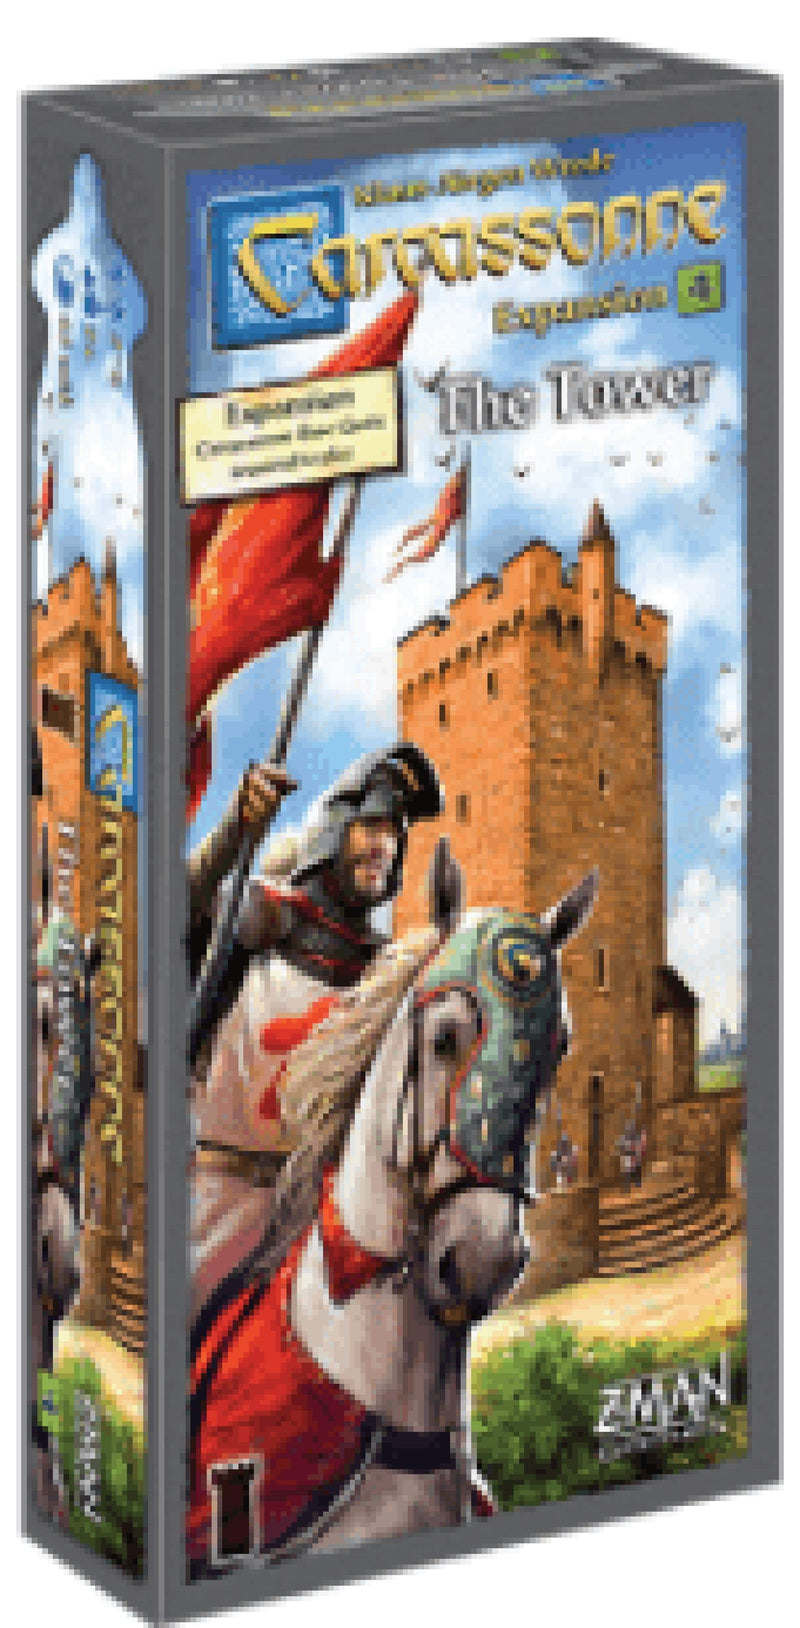 Carcassonne Expansion 4: The Tower